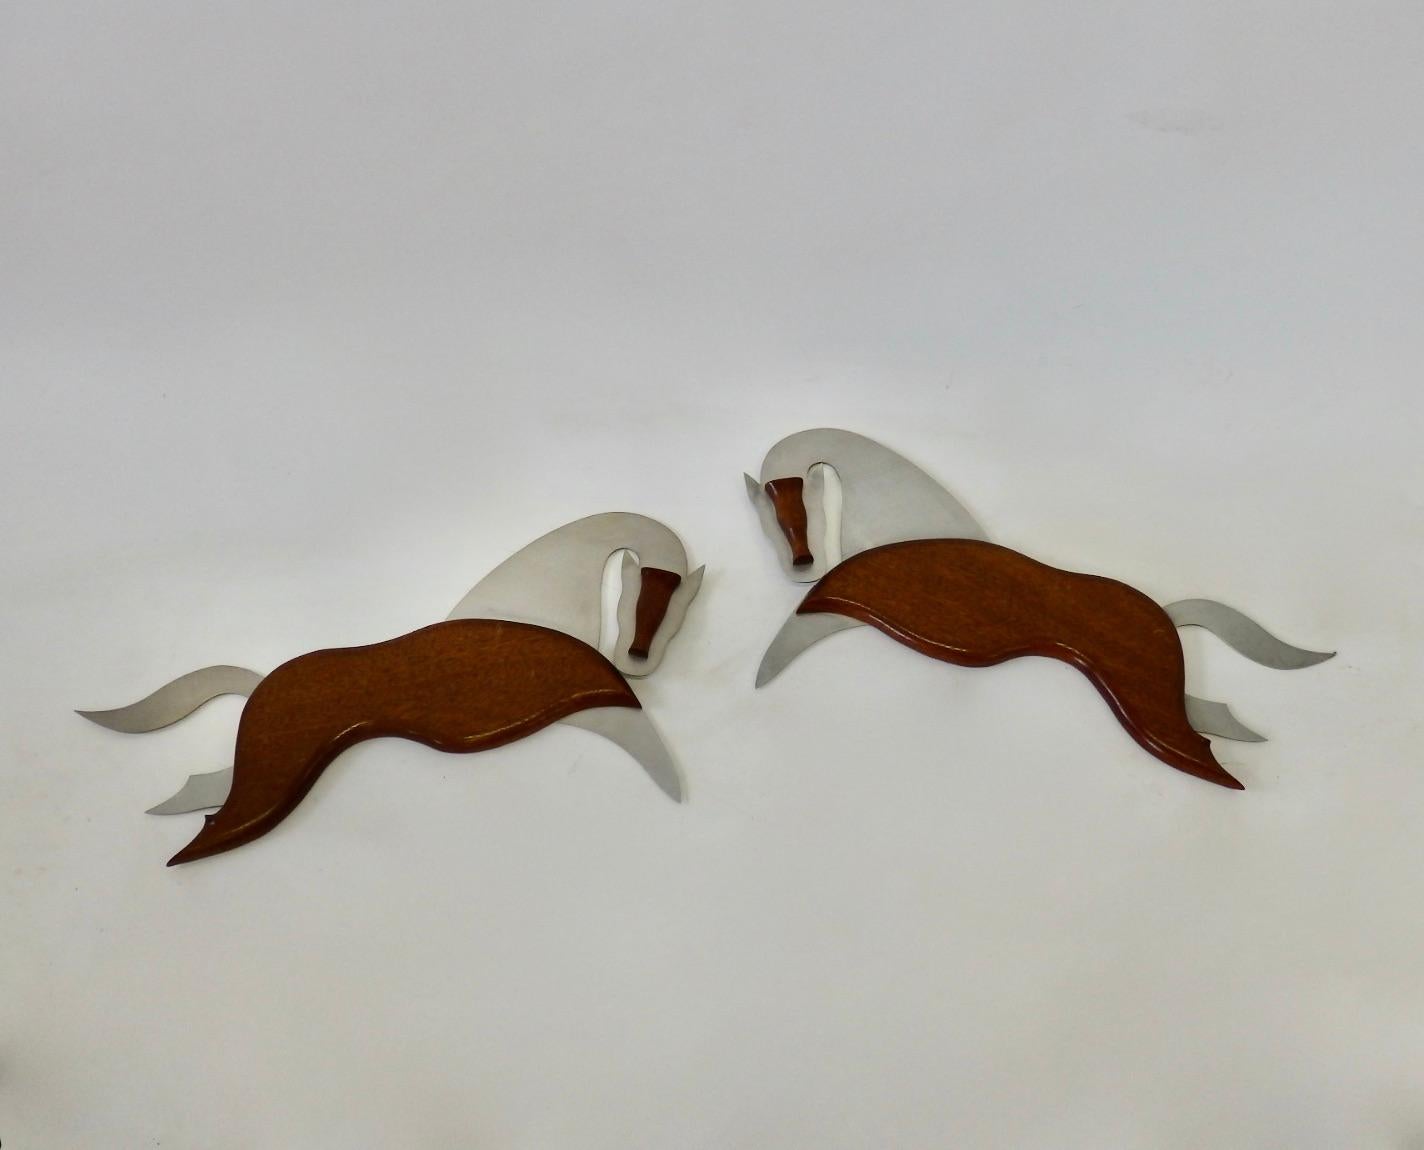 Pair of aluminum and mahogany equestrian wall sculptures.
Measurements in details are for a single sculpture.